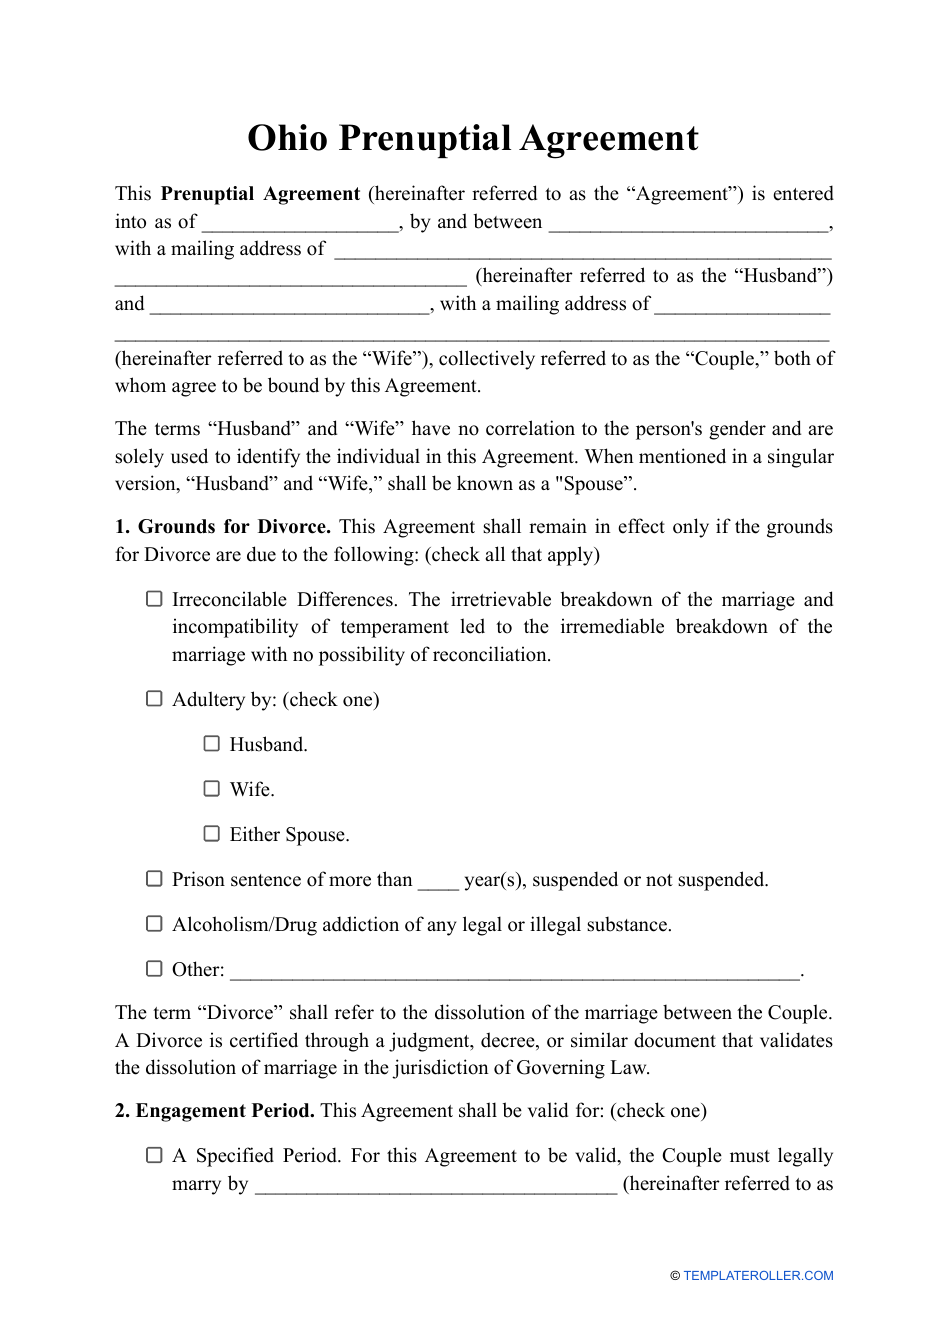 Ohio Prenuptial Agreement Template Fill Out, Sign Online and Download